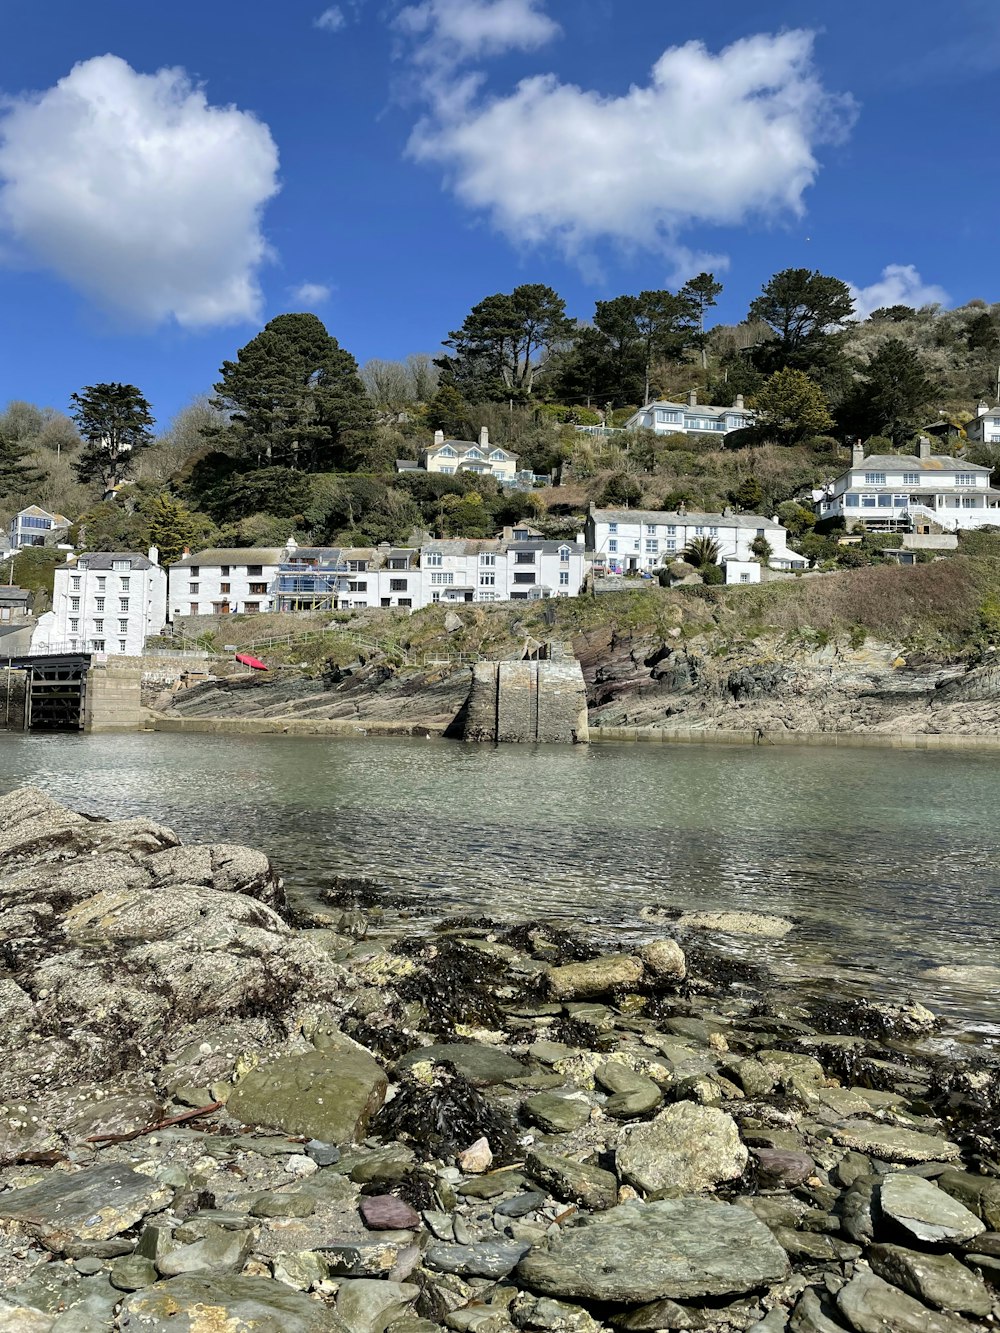 a rocky shore with buildings and trees